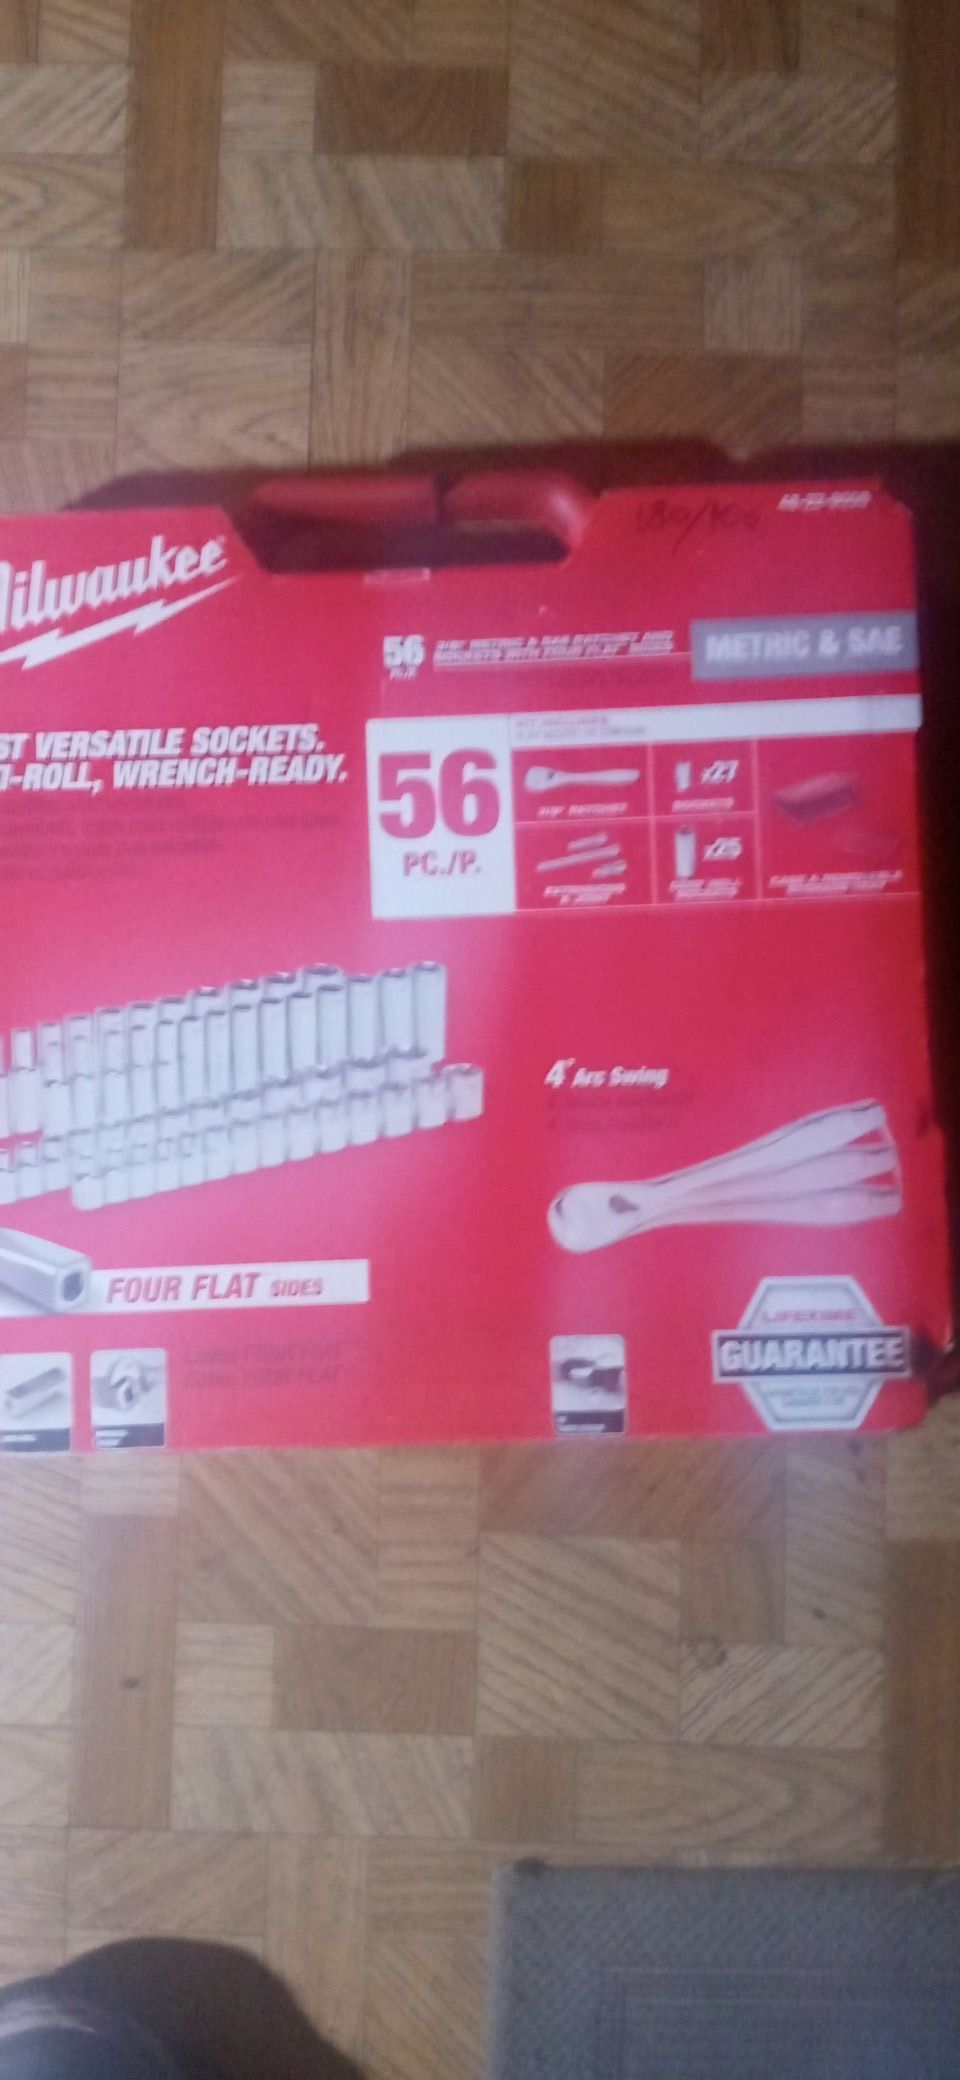 Milwaukee socket set 3/8 drive brand new in box still. Has the zip tie around the handle never been opened